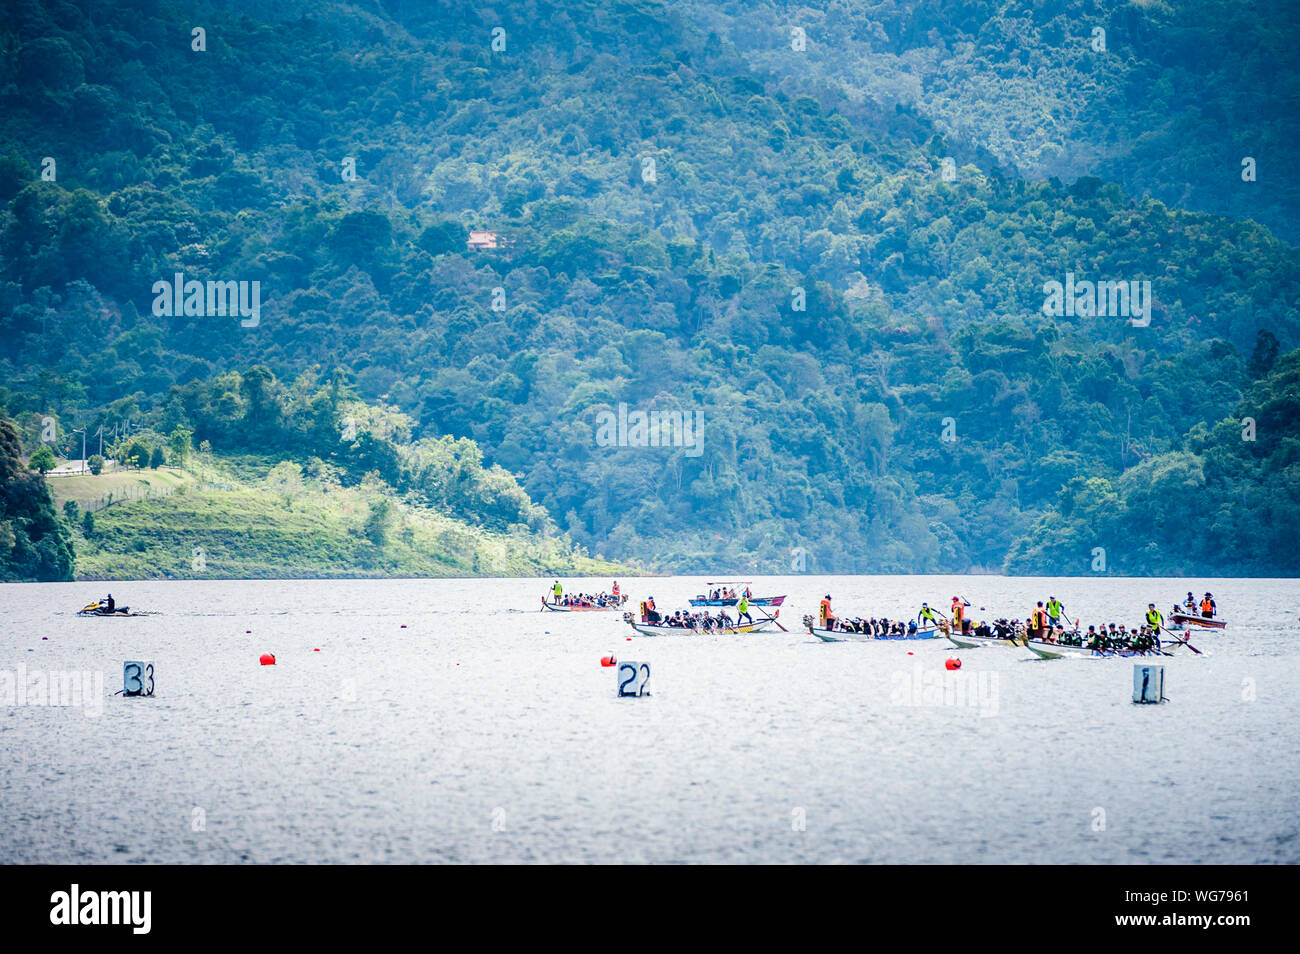 Dragon Boat Race In River Against Mountain Stock Photo